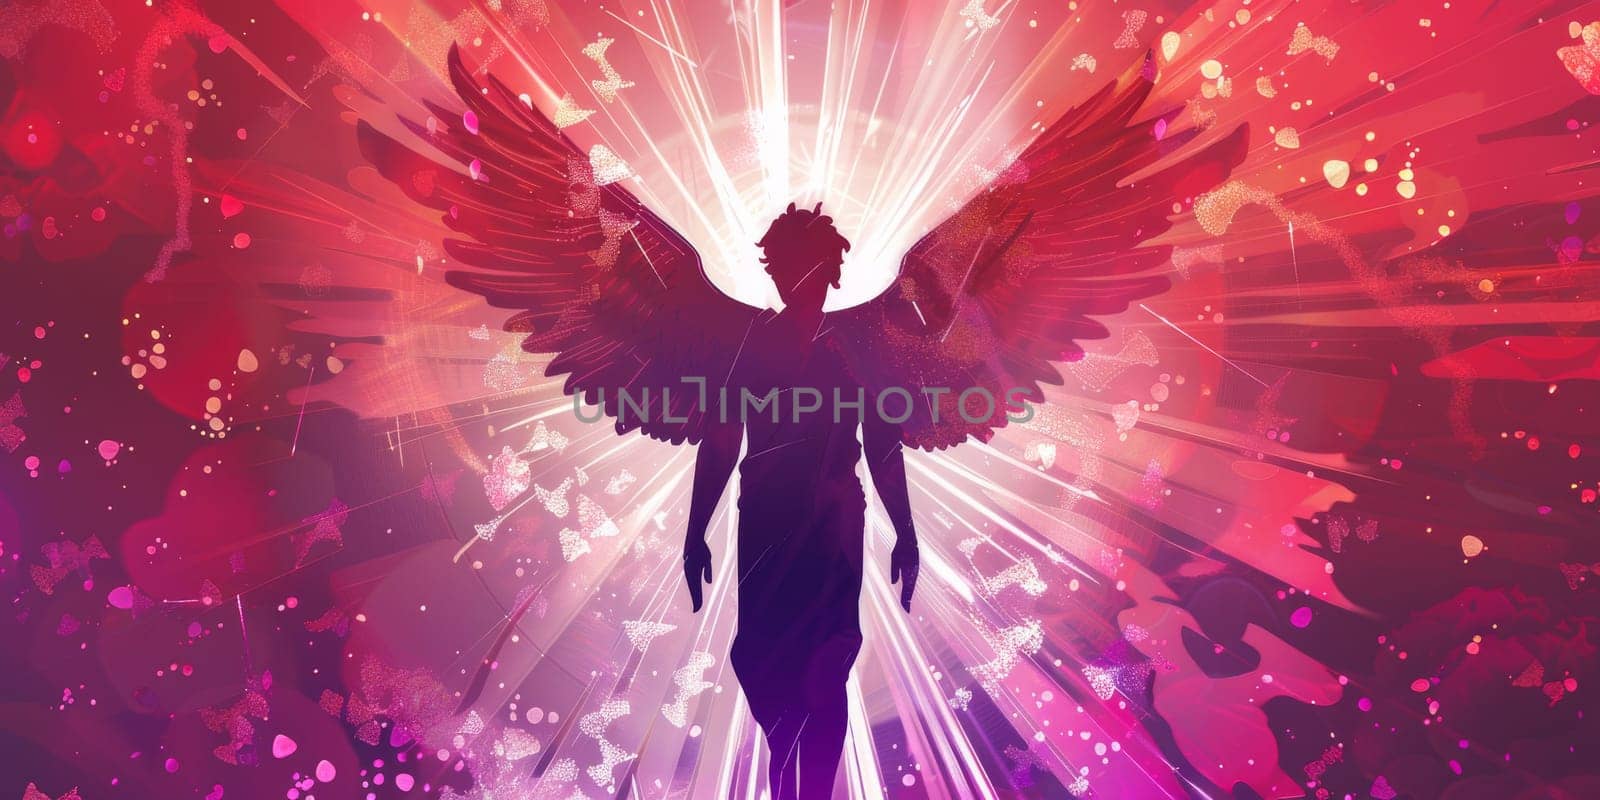 Silhouette of an angel man with a red and purple effects around